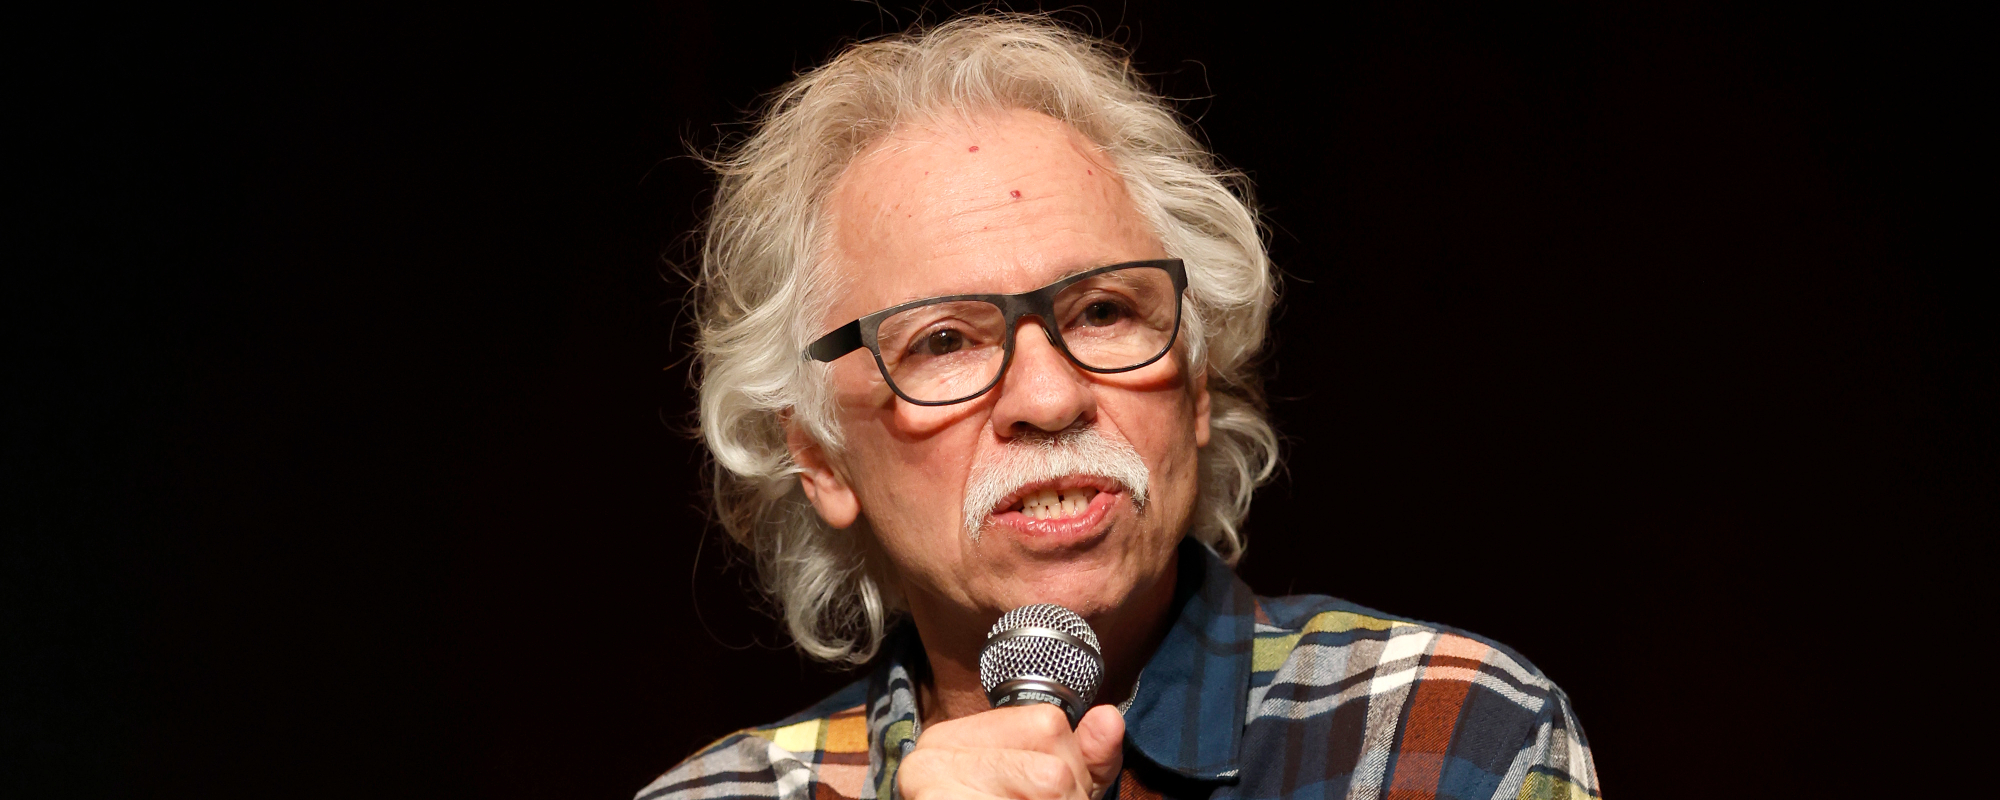 Oak Ridge Boys’ Joe Bonsall Warns Imposter Trying to Capitalize off of Health Concerns